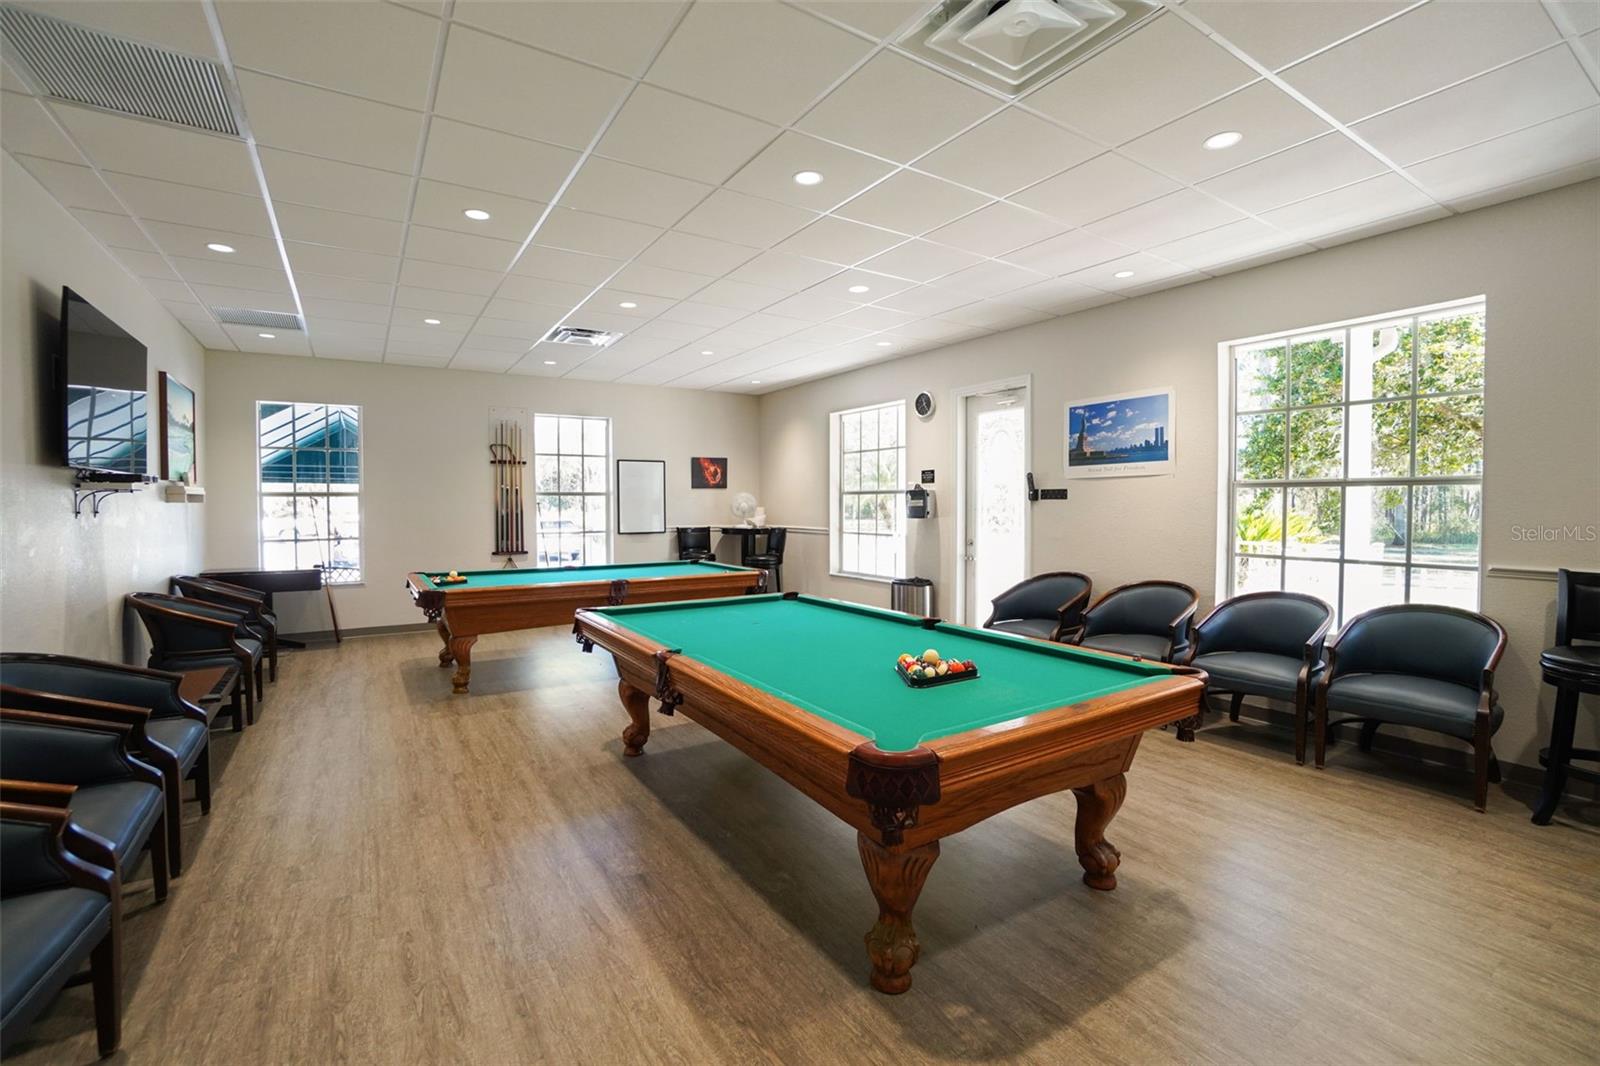 How about a game of pool, also at the activities center.